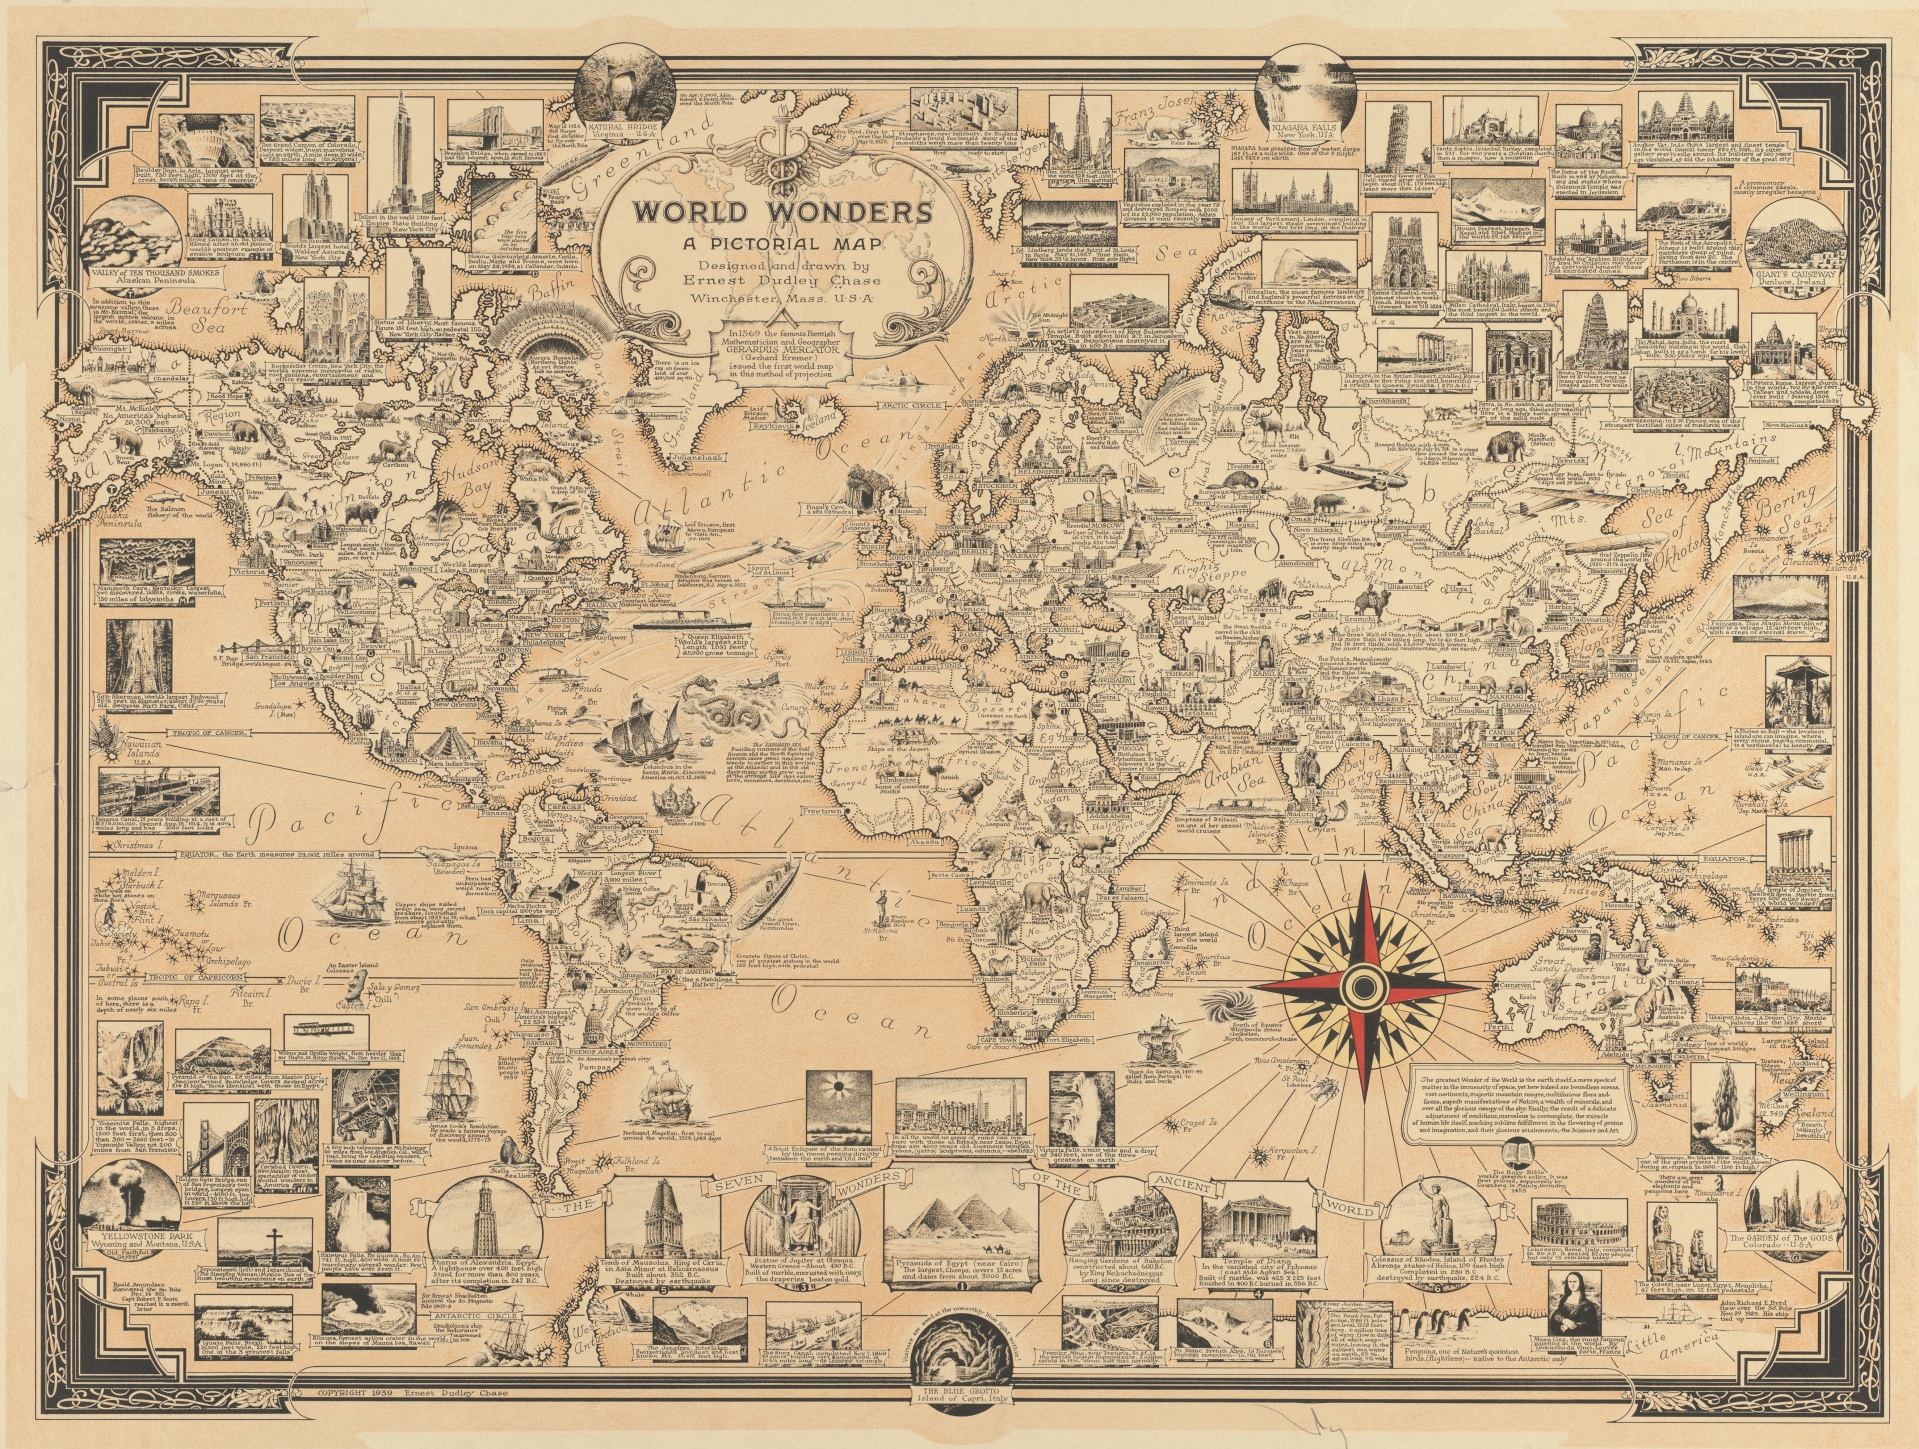 World wonders - a pictorial map designed and drawn by Ernest Dudley Chase, Winchester, Mass. U.S.A. Date 1939